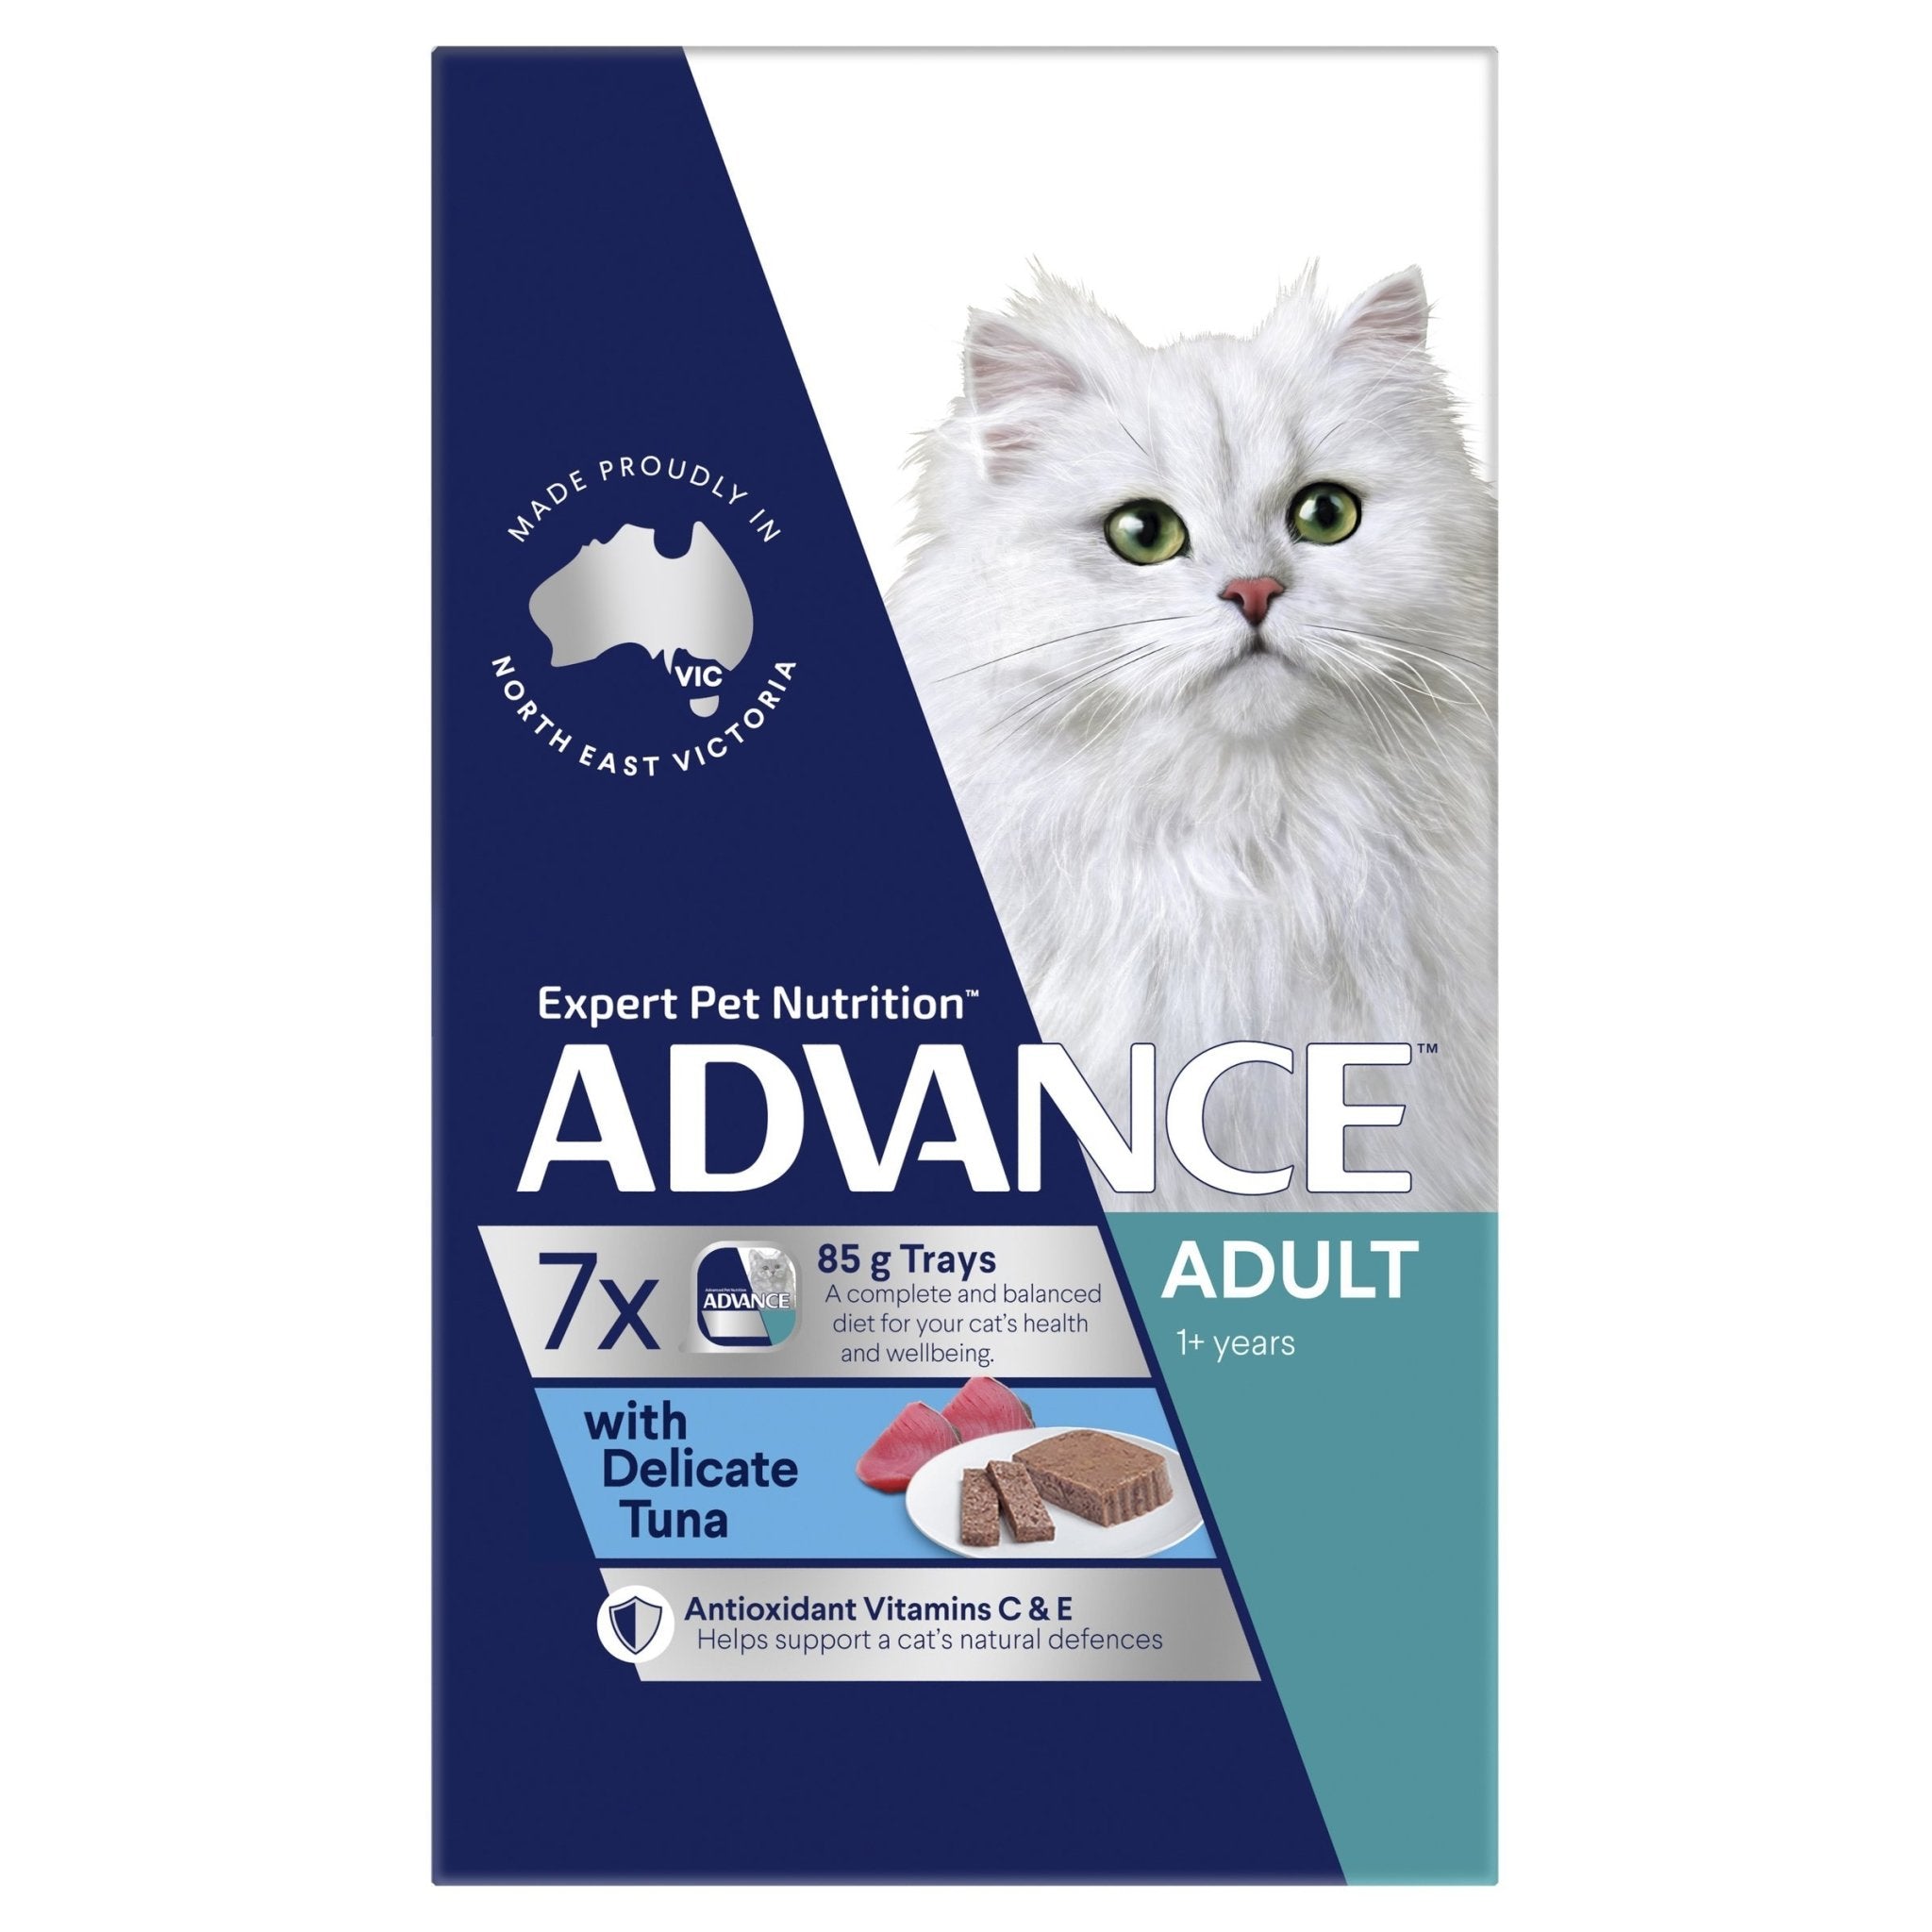 ADVANCE Adult Wet Cat Food with Delicate Tuna 7x85g Trays